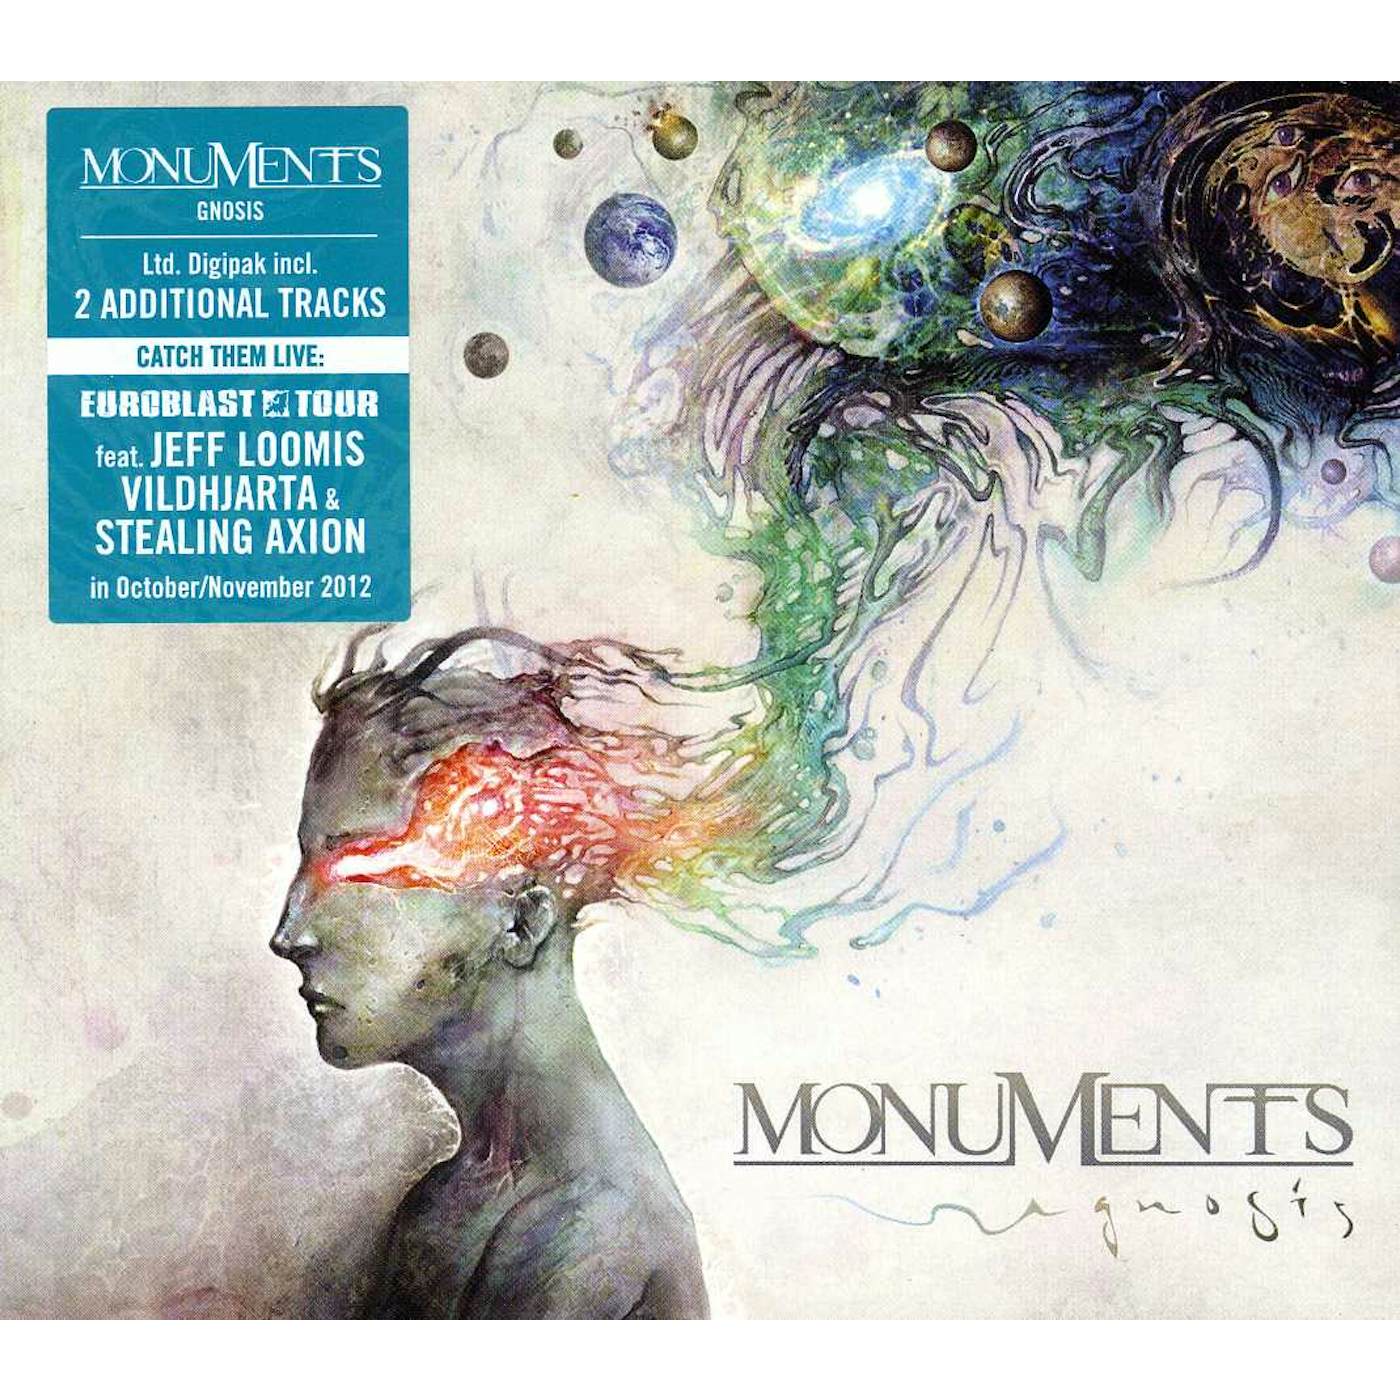 Monuments GNOSIS: LIMITED CD